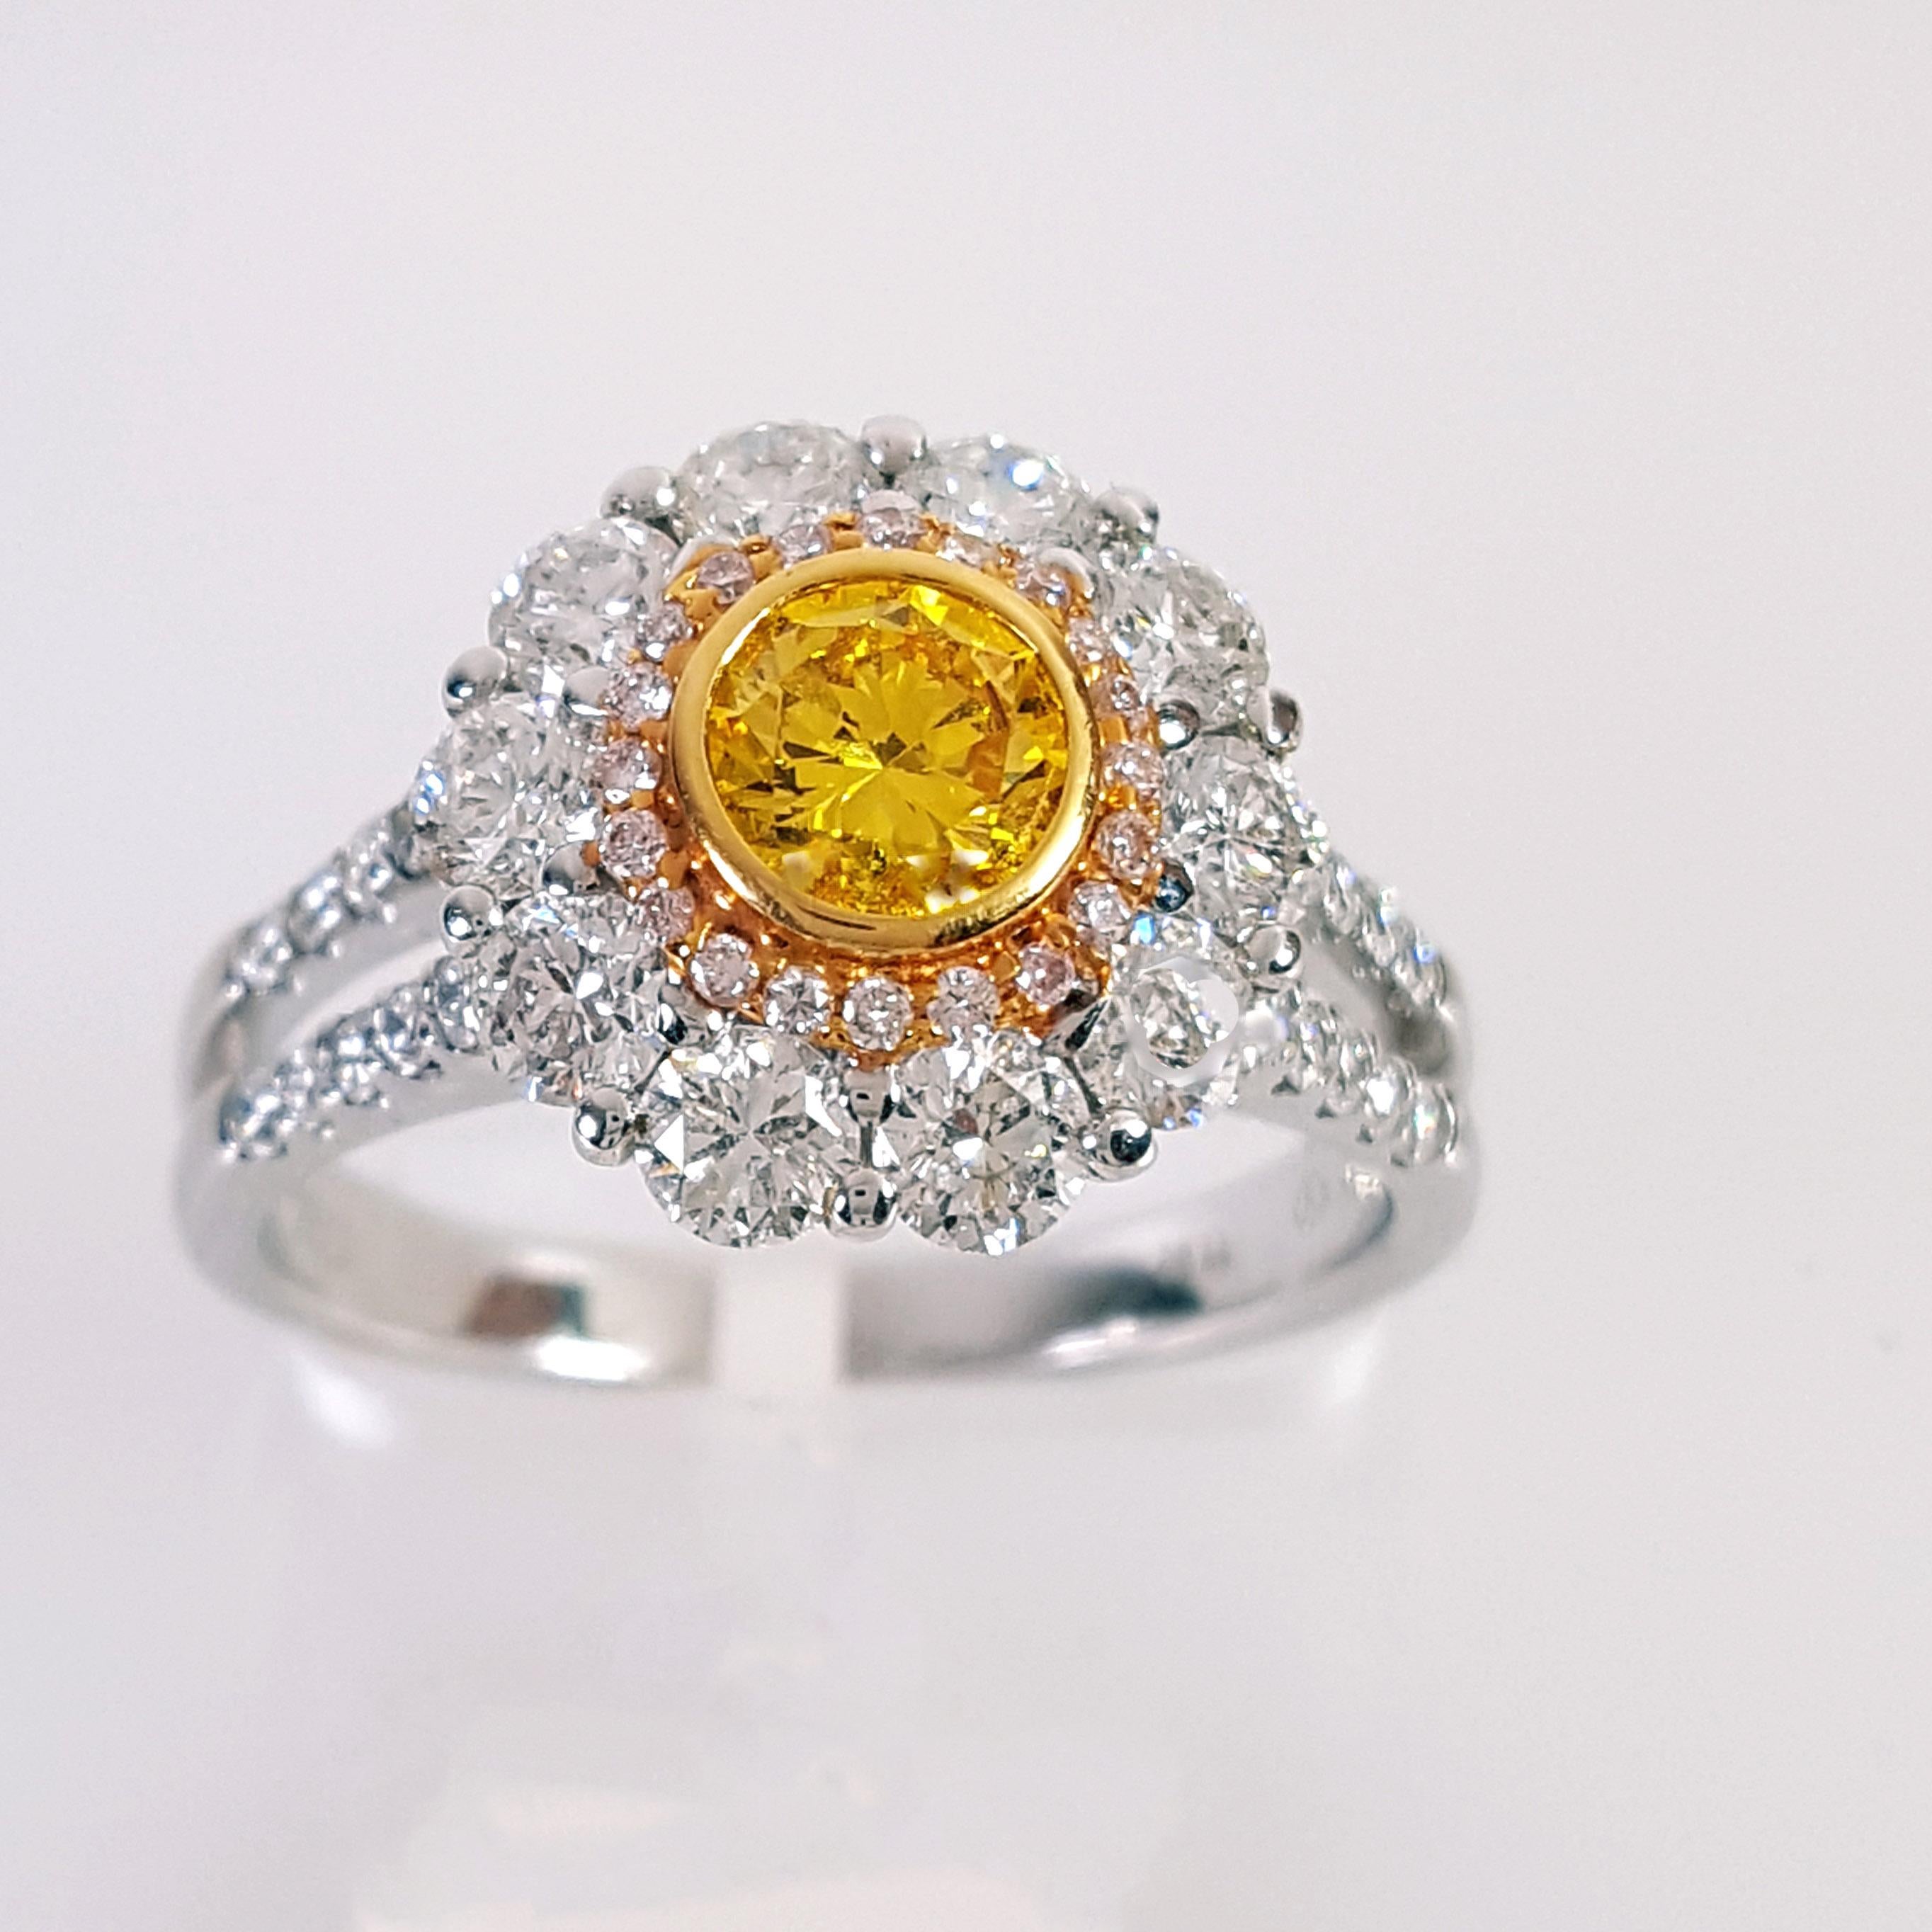 Victorian 0.44 Carat Fancy Vivid Yellow Diamond Engagement Cocktail Ring, GIA Certificate  For Sale